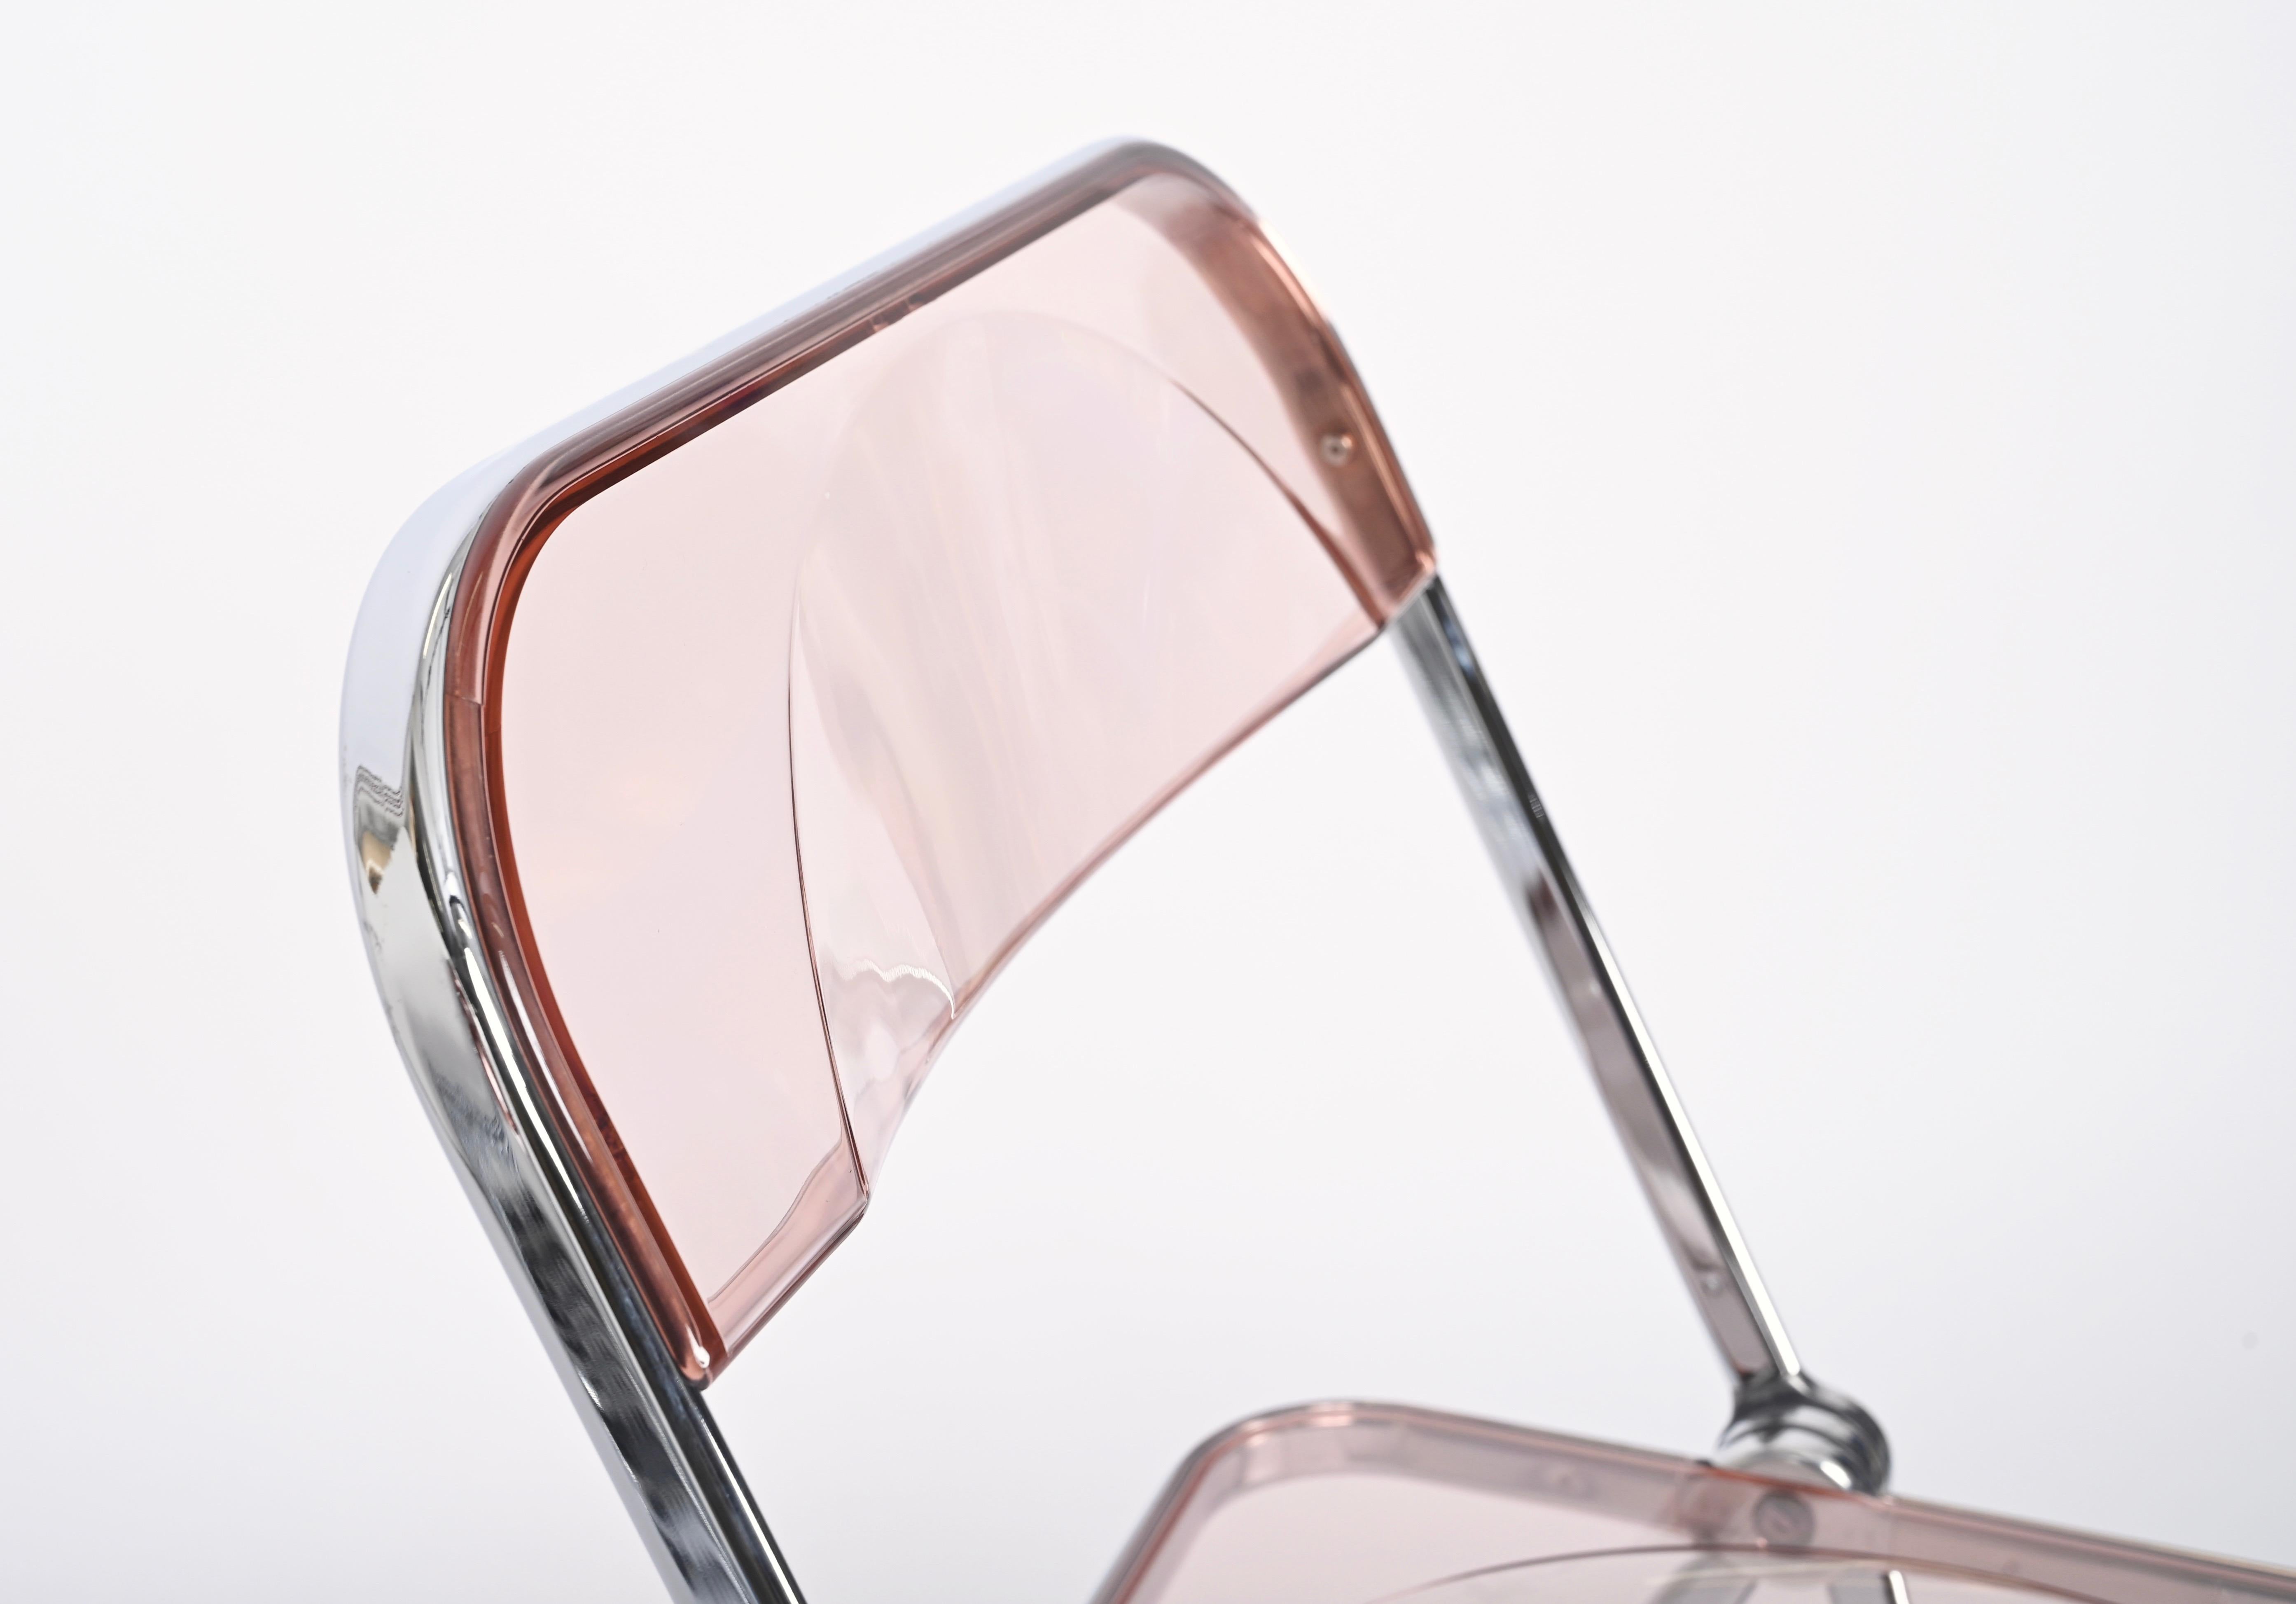 Italian Set of 6 Lucite Pink and Chrome Plia Chairs, Piretti for Castelli, Italy 1970s For Sale